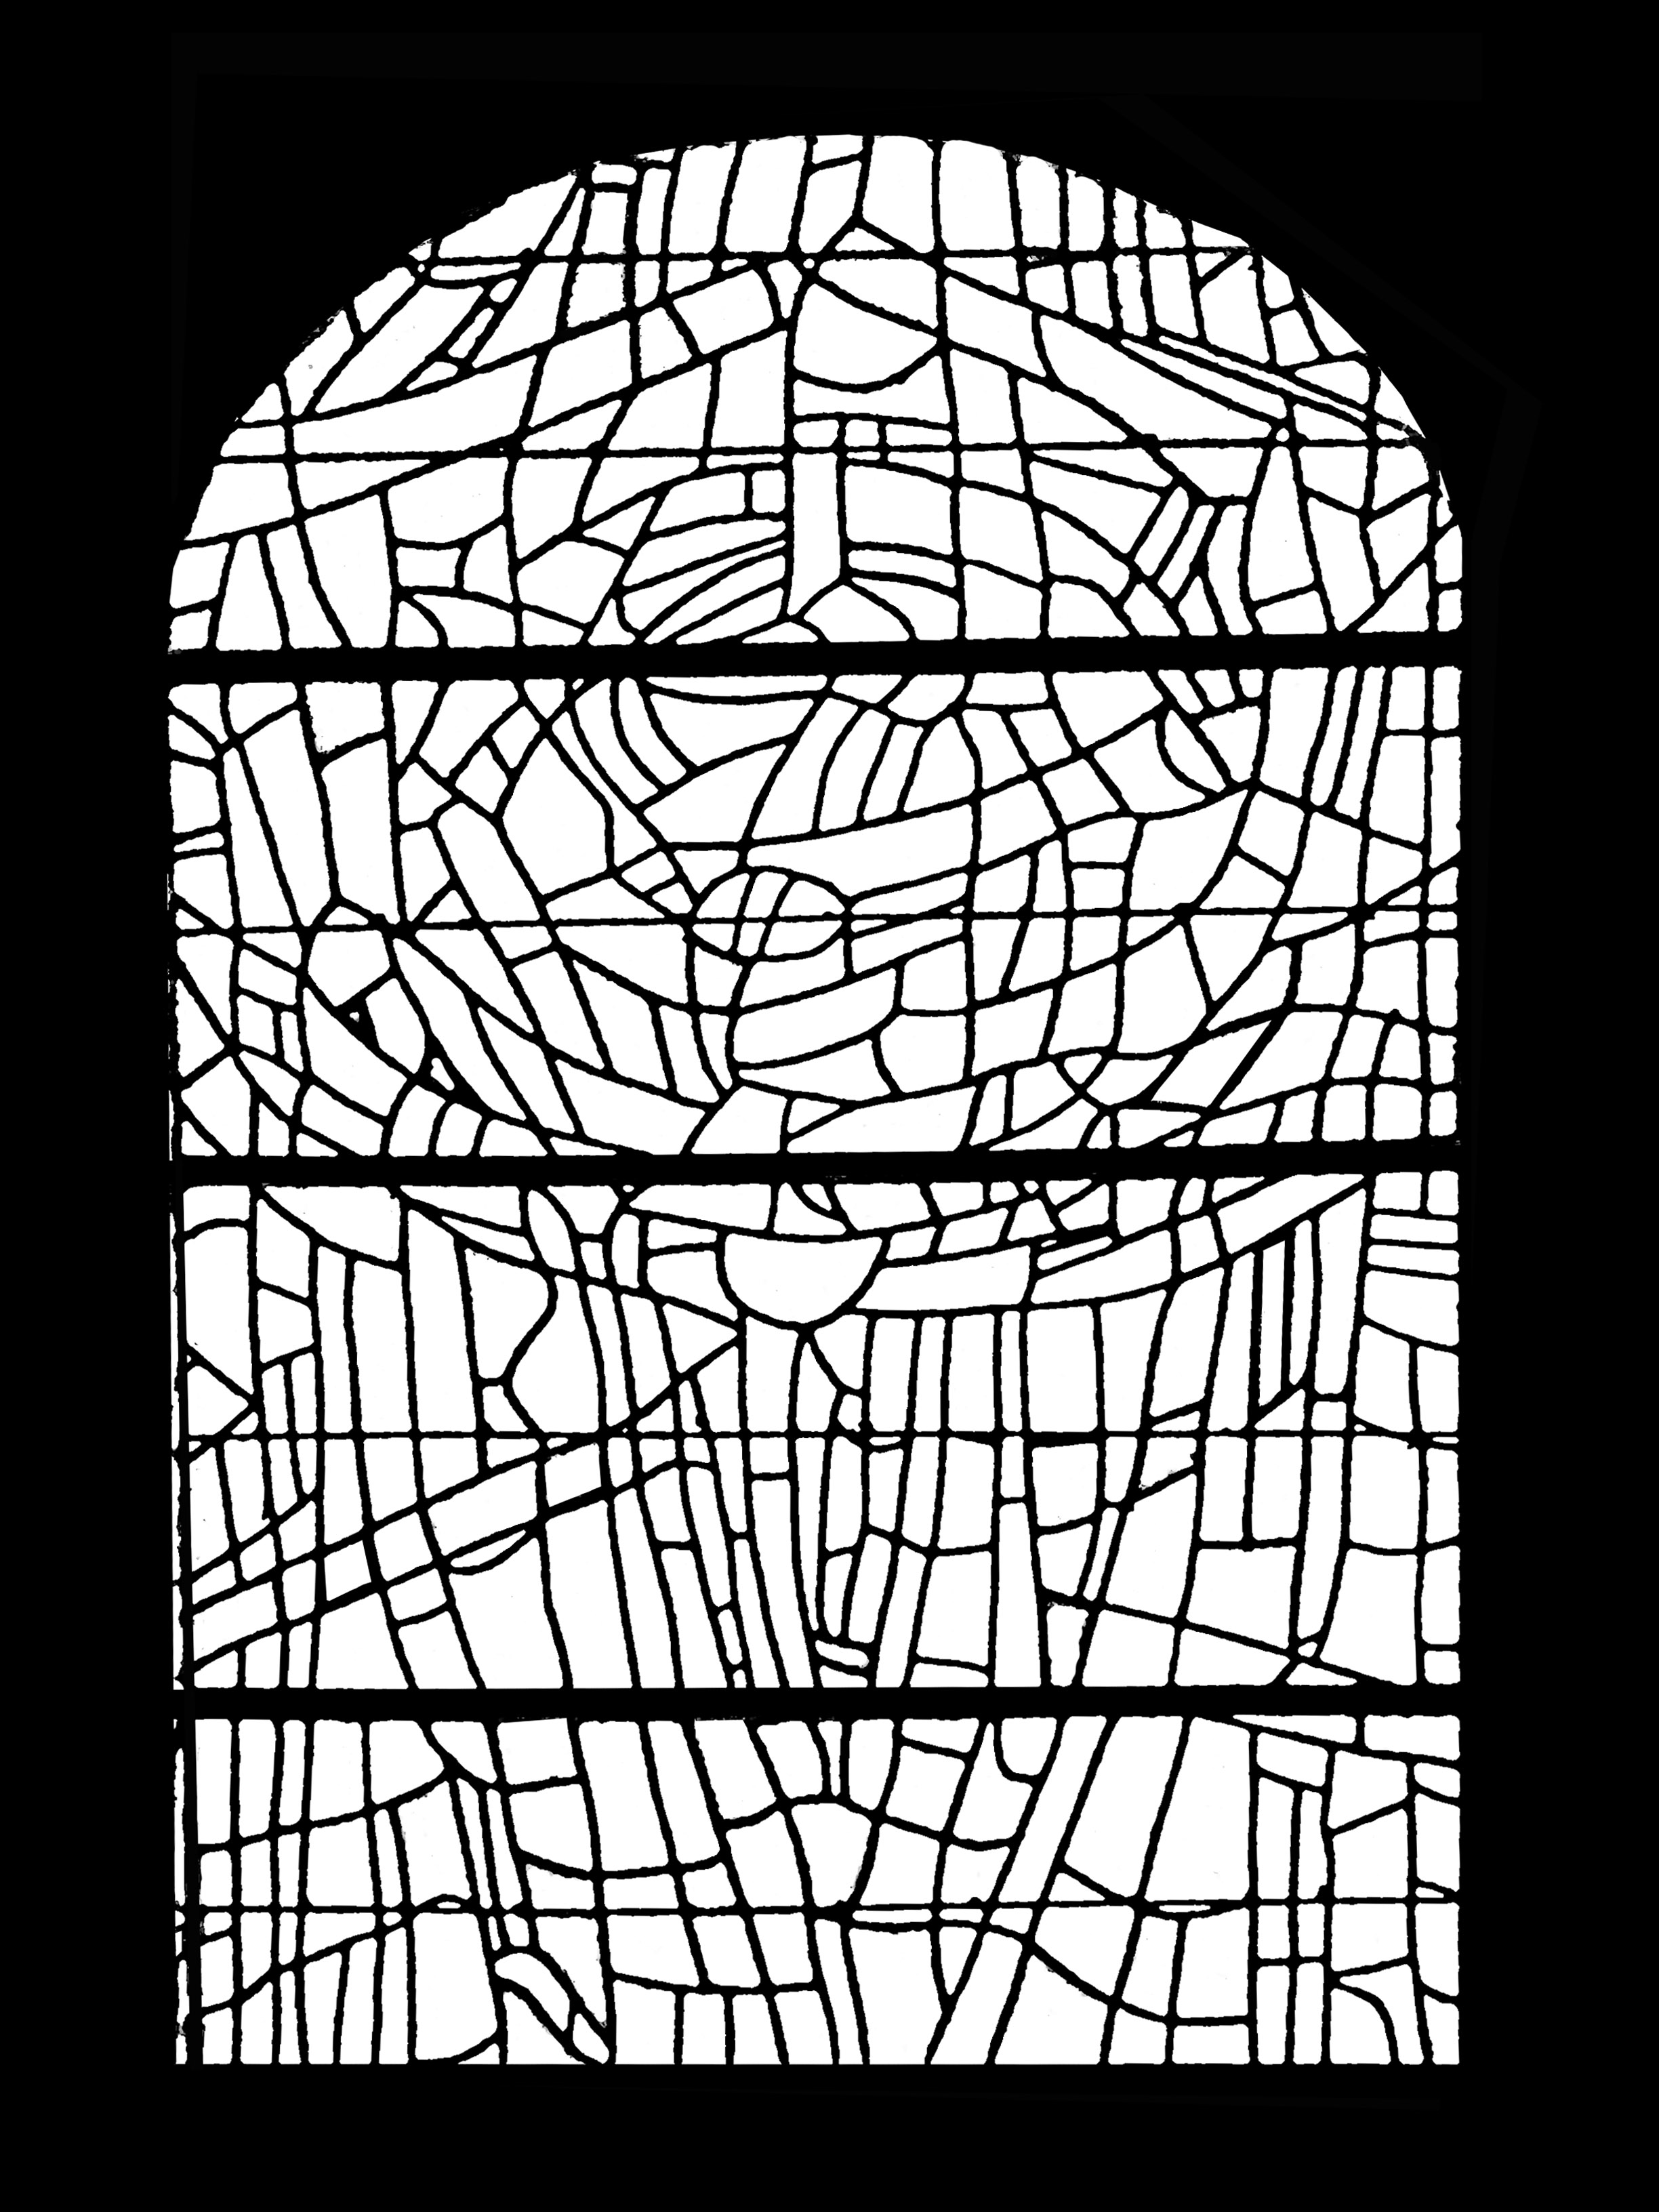 Coloring page made from a modern Stained glass from Saint Servant sur Oust Church (France) - version 1